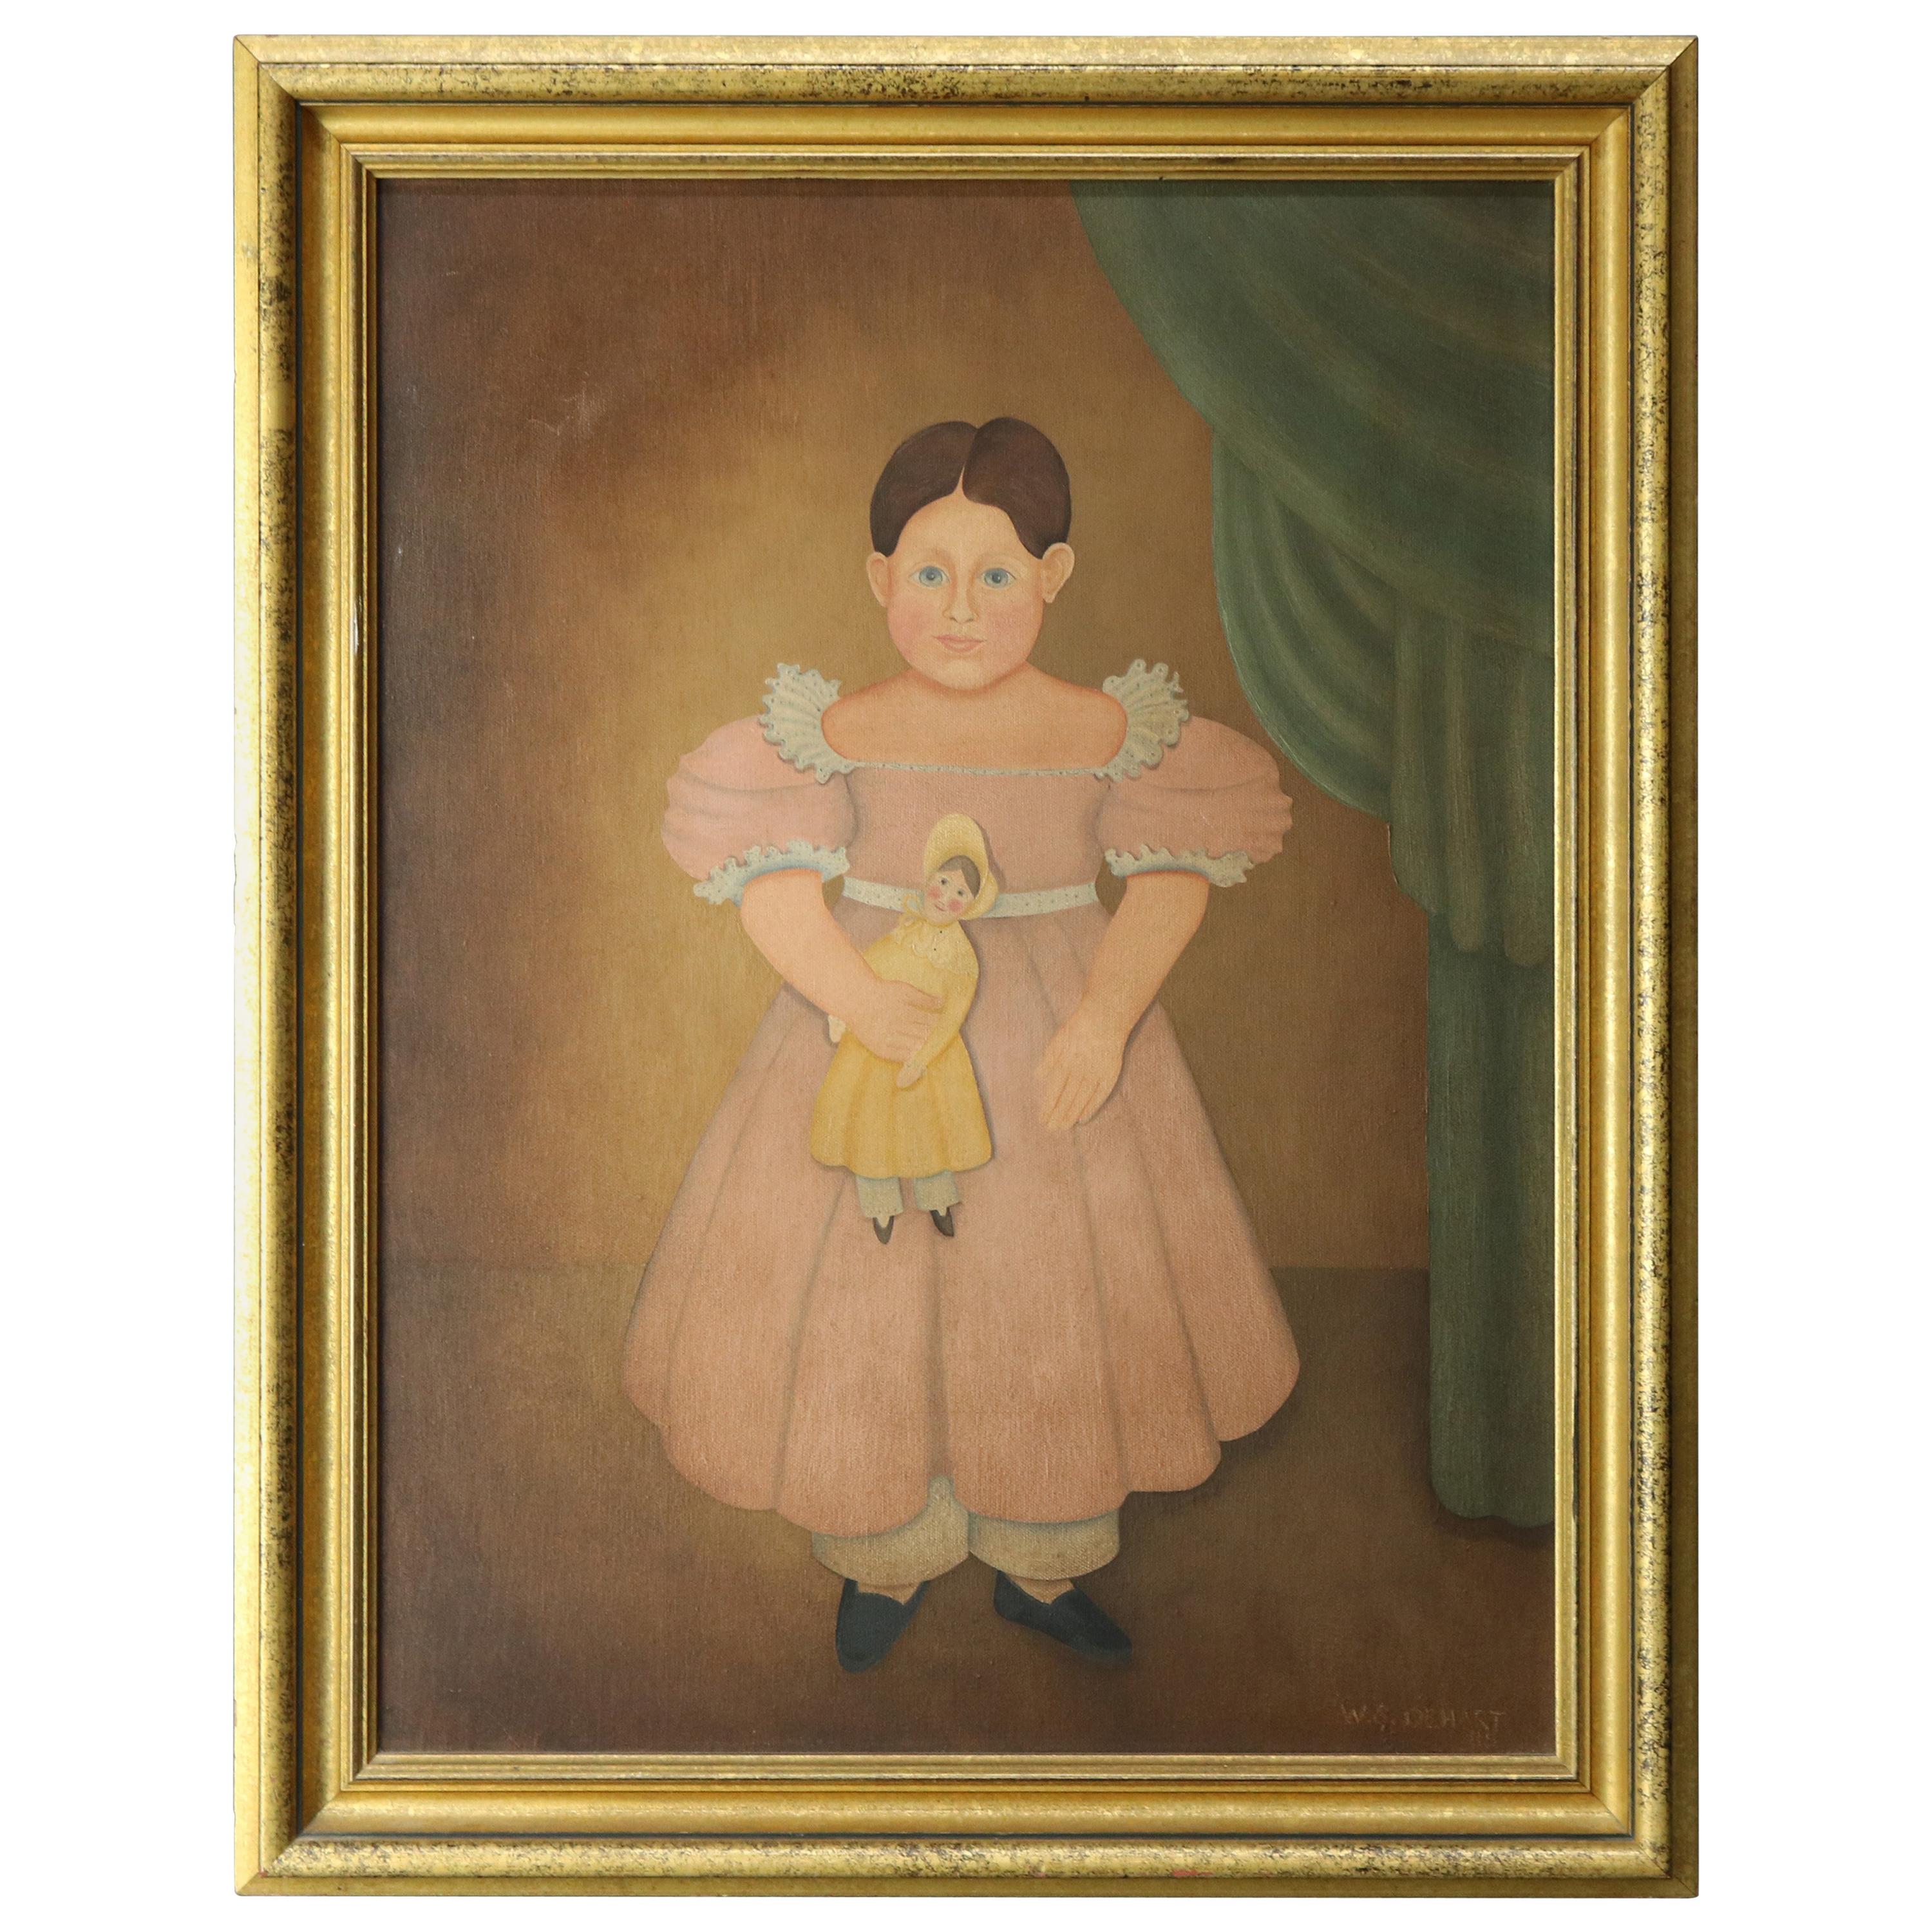 Vintage Folk Art Canvas Chromolithograph Print of Young Girl with Doll